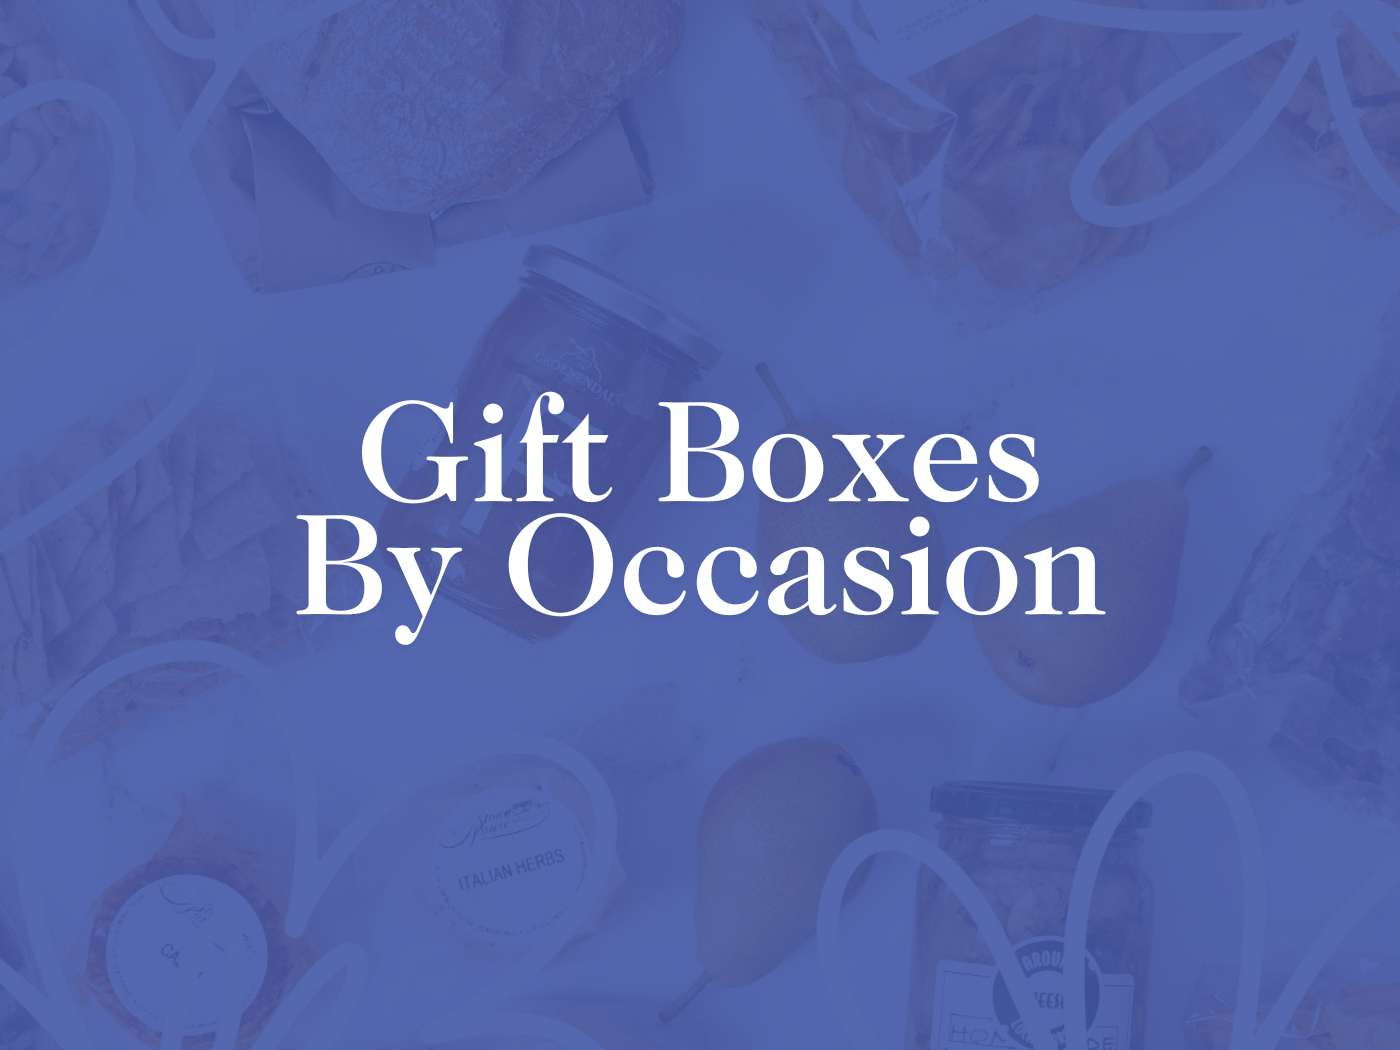 Overlay of various gift items blurred in the background with the text 'Gift Boxes By Occasion' in bold, suggesting a diverse collection tailored for different events. Fabulous Flowers and Gifts.